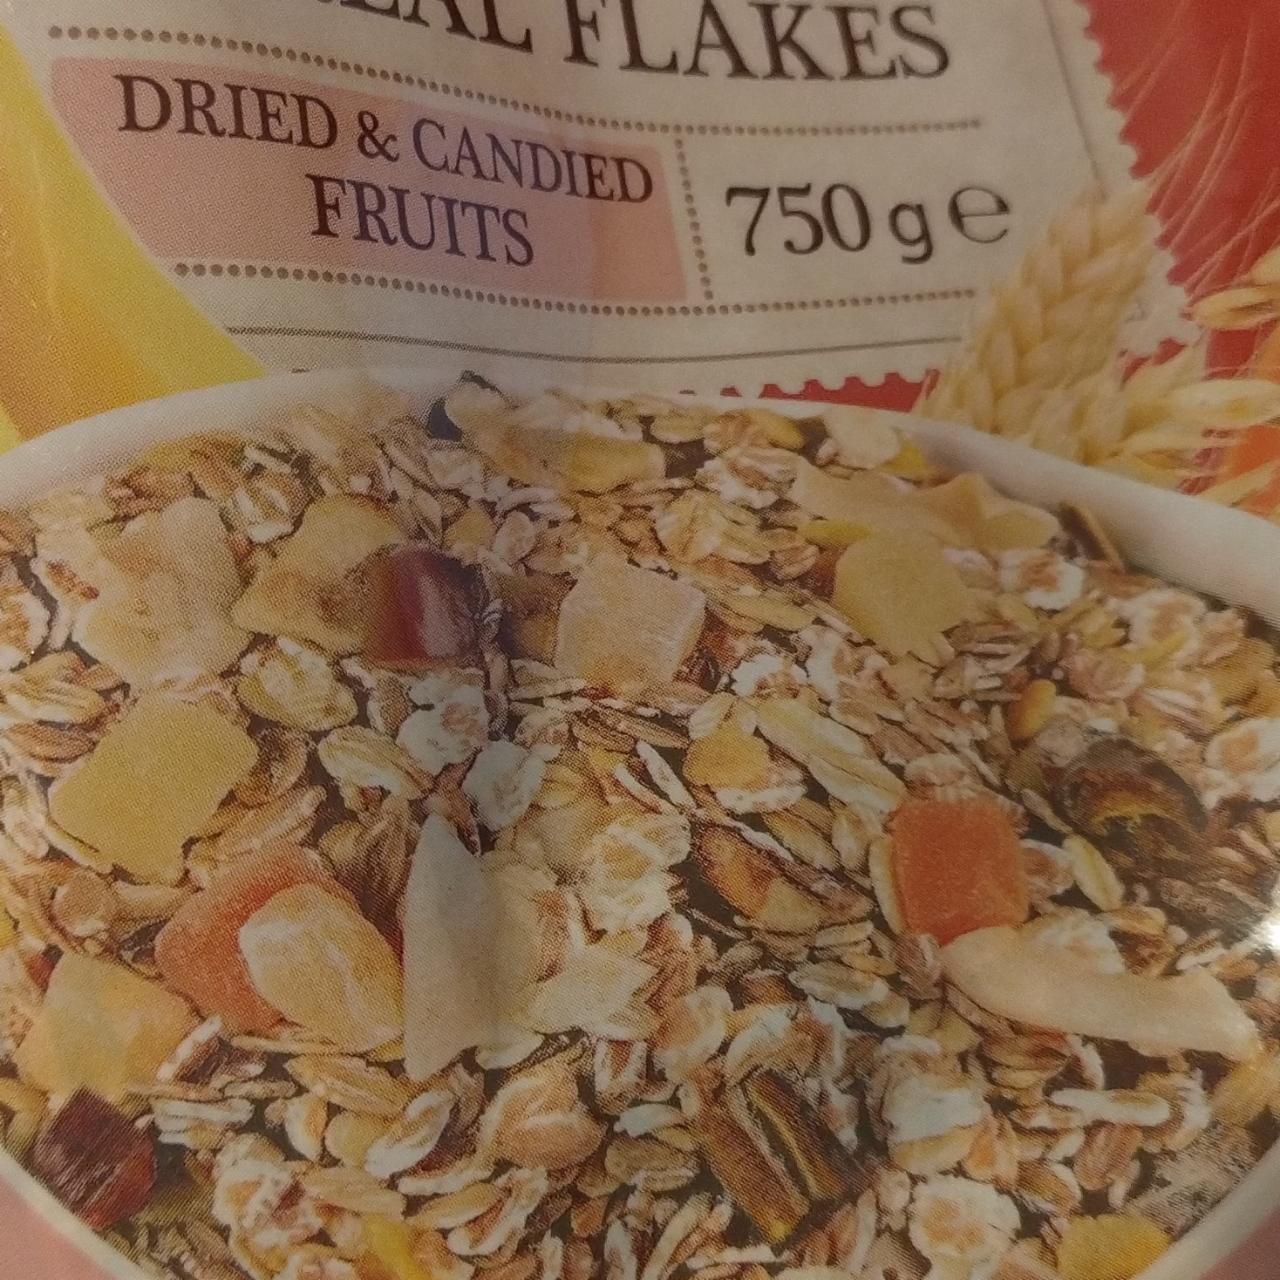 Zdjęcia - Cereal Flakes Dried & candied frutis